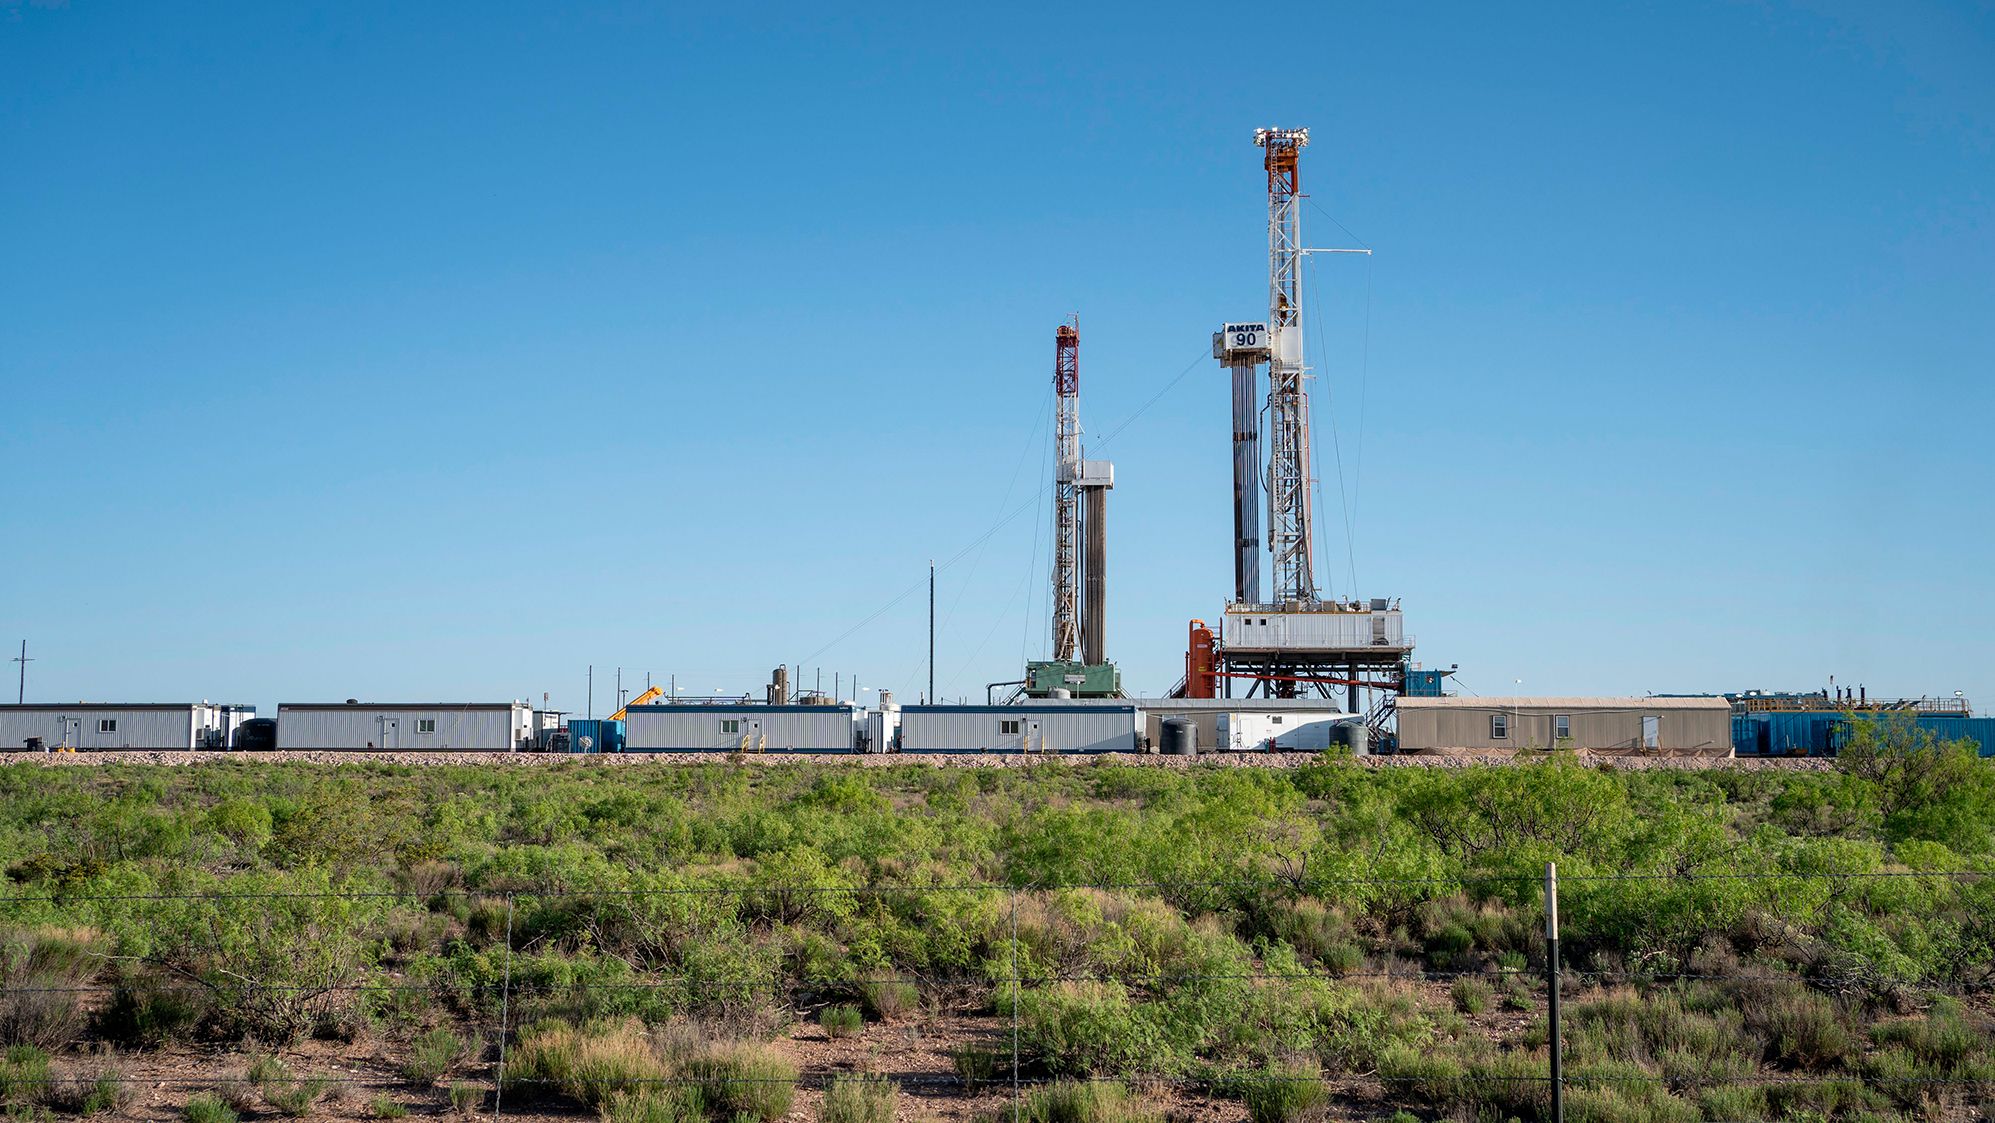 An oil drilling rig is pictured on April 24, 2020, near Carlsbad, New Mexico.